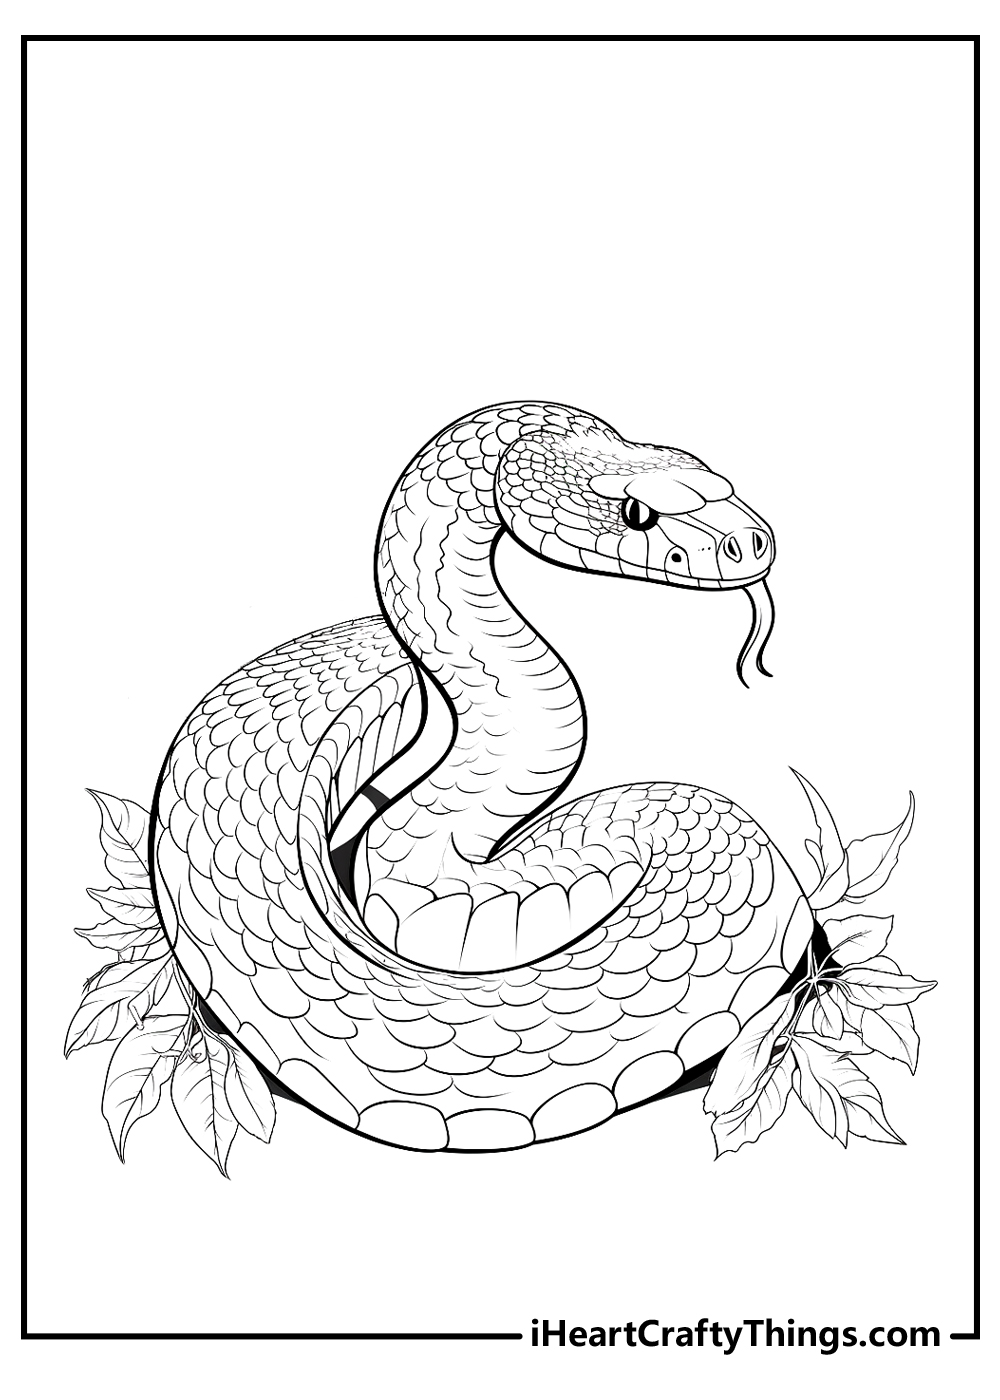 new snakes coloring printable free download